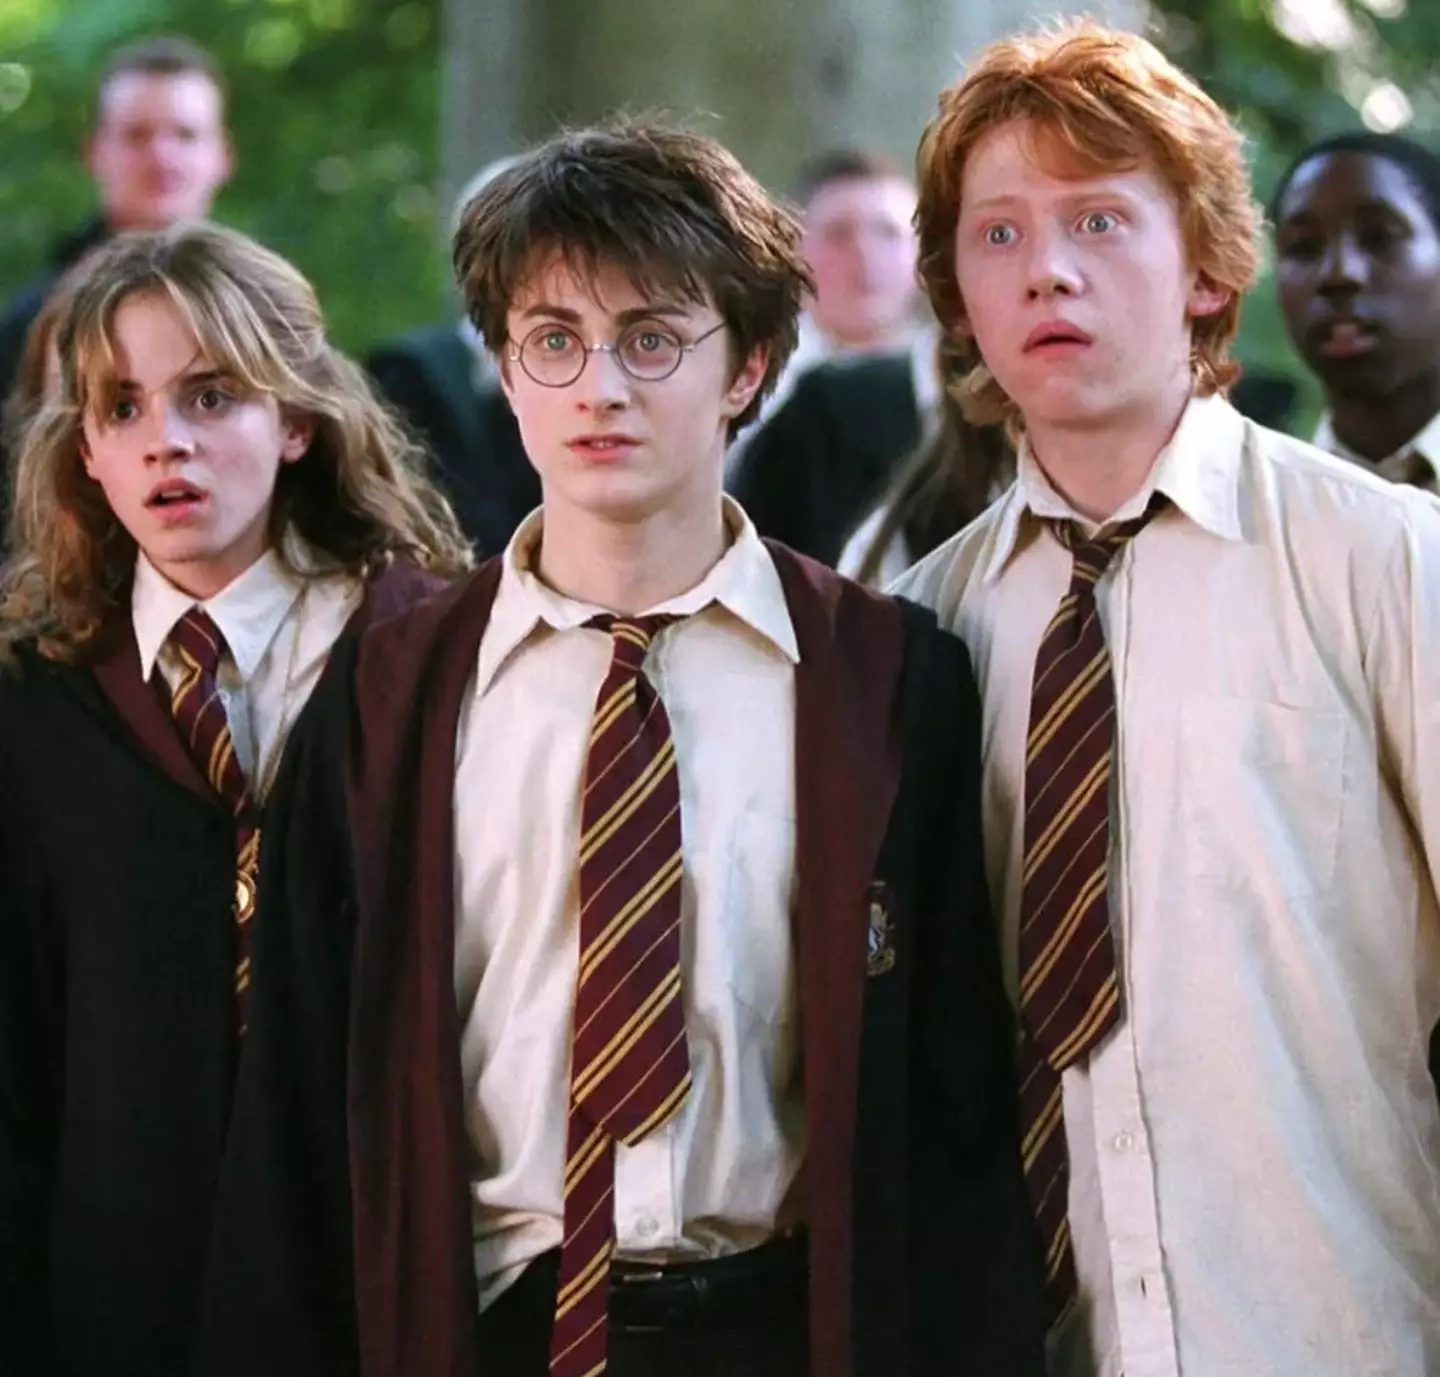 Harry Potter was previously made into an eight-film series, starring Daniel Radcliffe, Emma Watson and Rupert Grint.